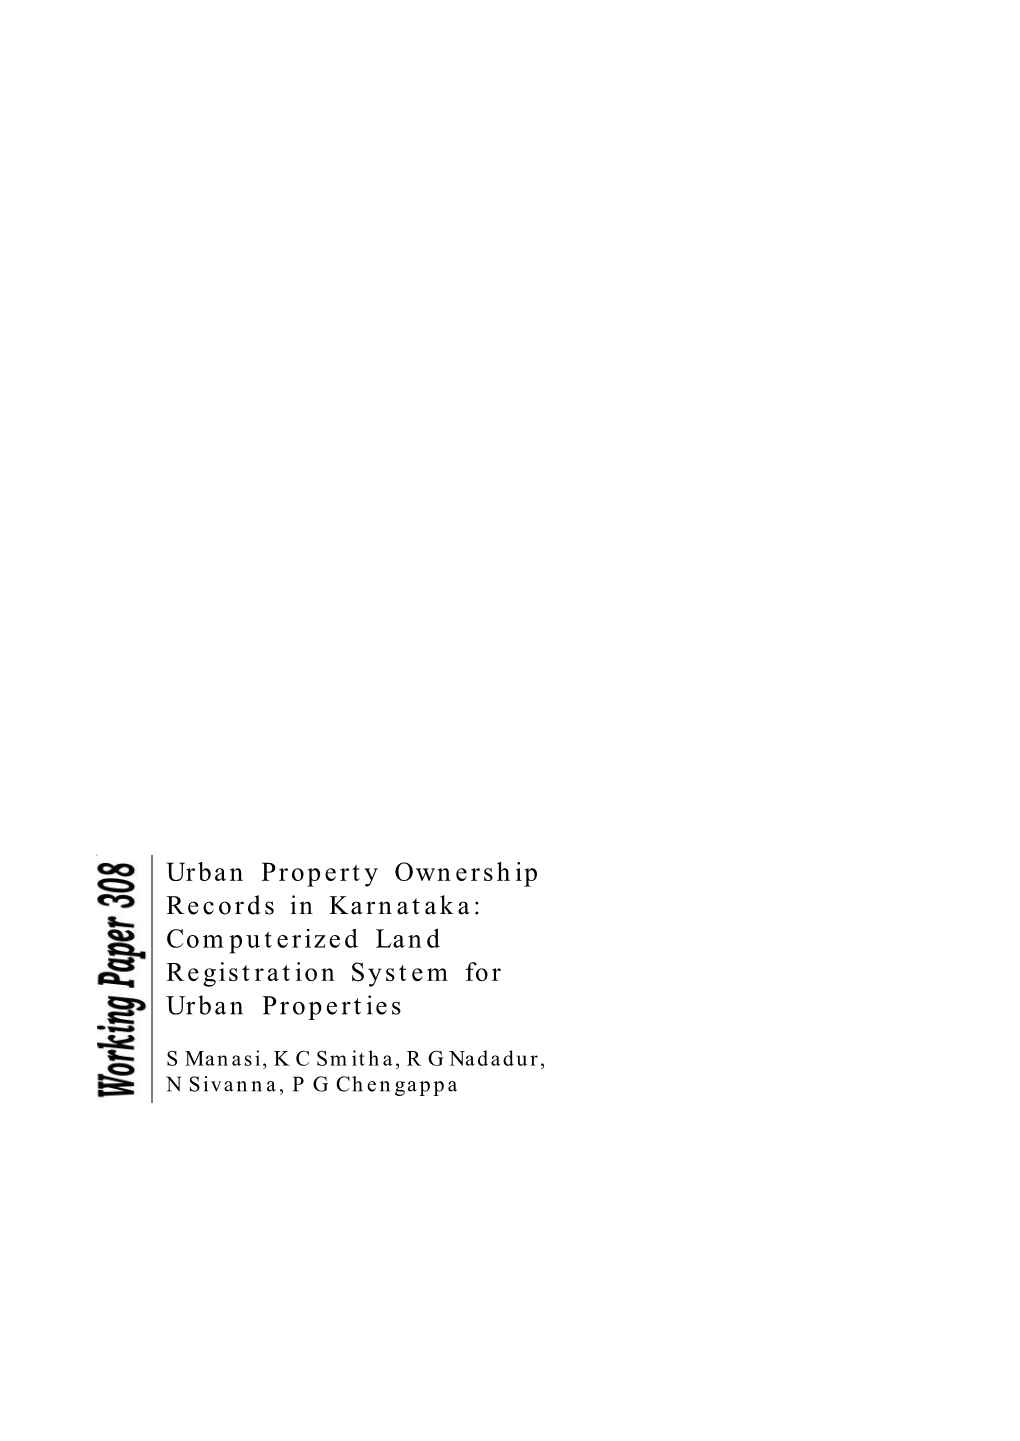 Urban Property Ownership Records in Karnataka: Computerized Land Registration System for Urban Properties